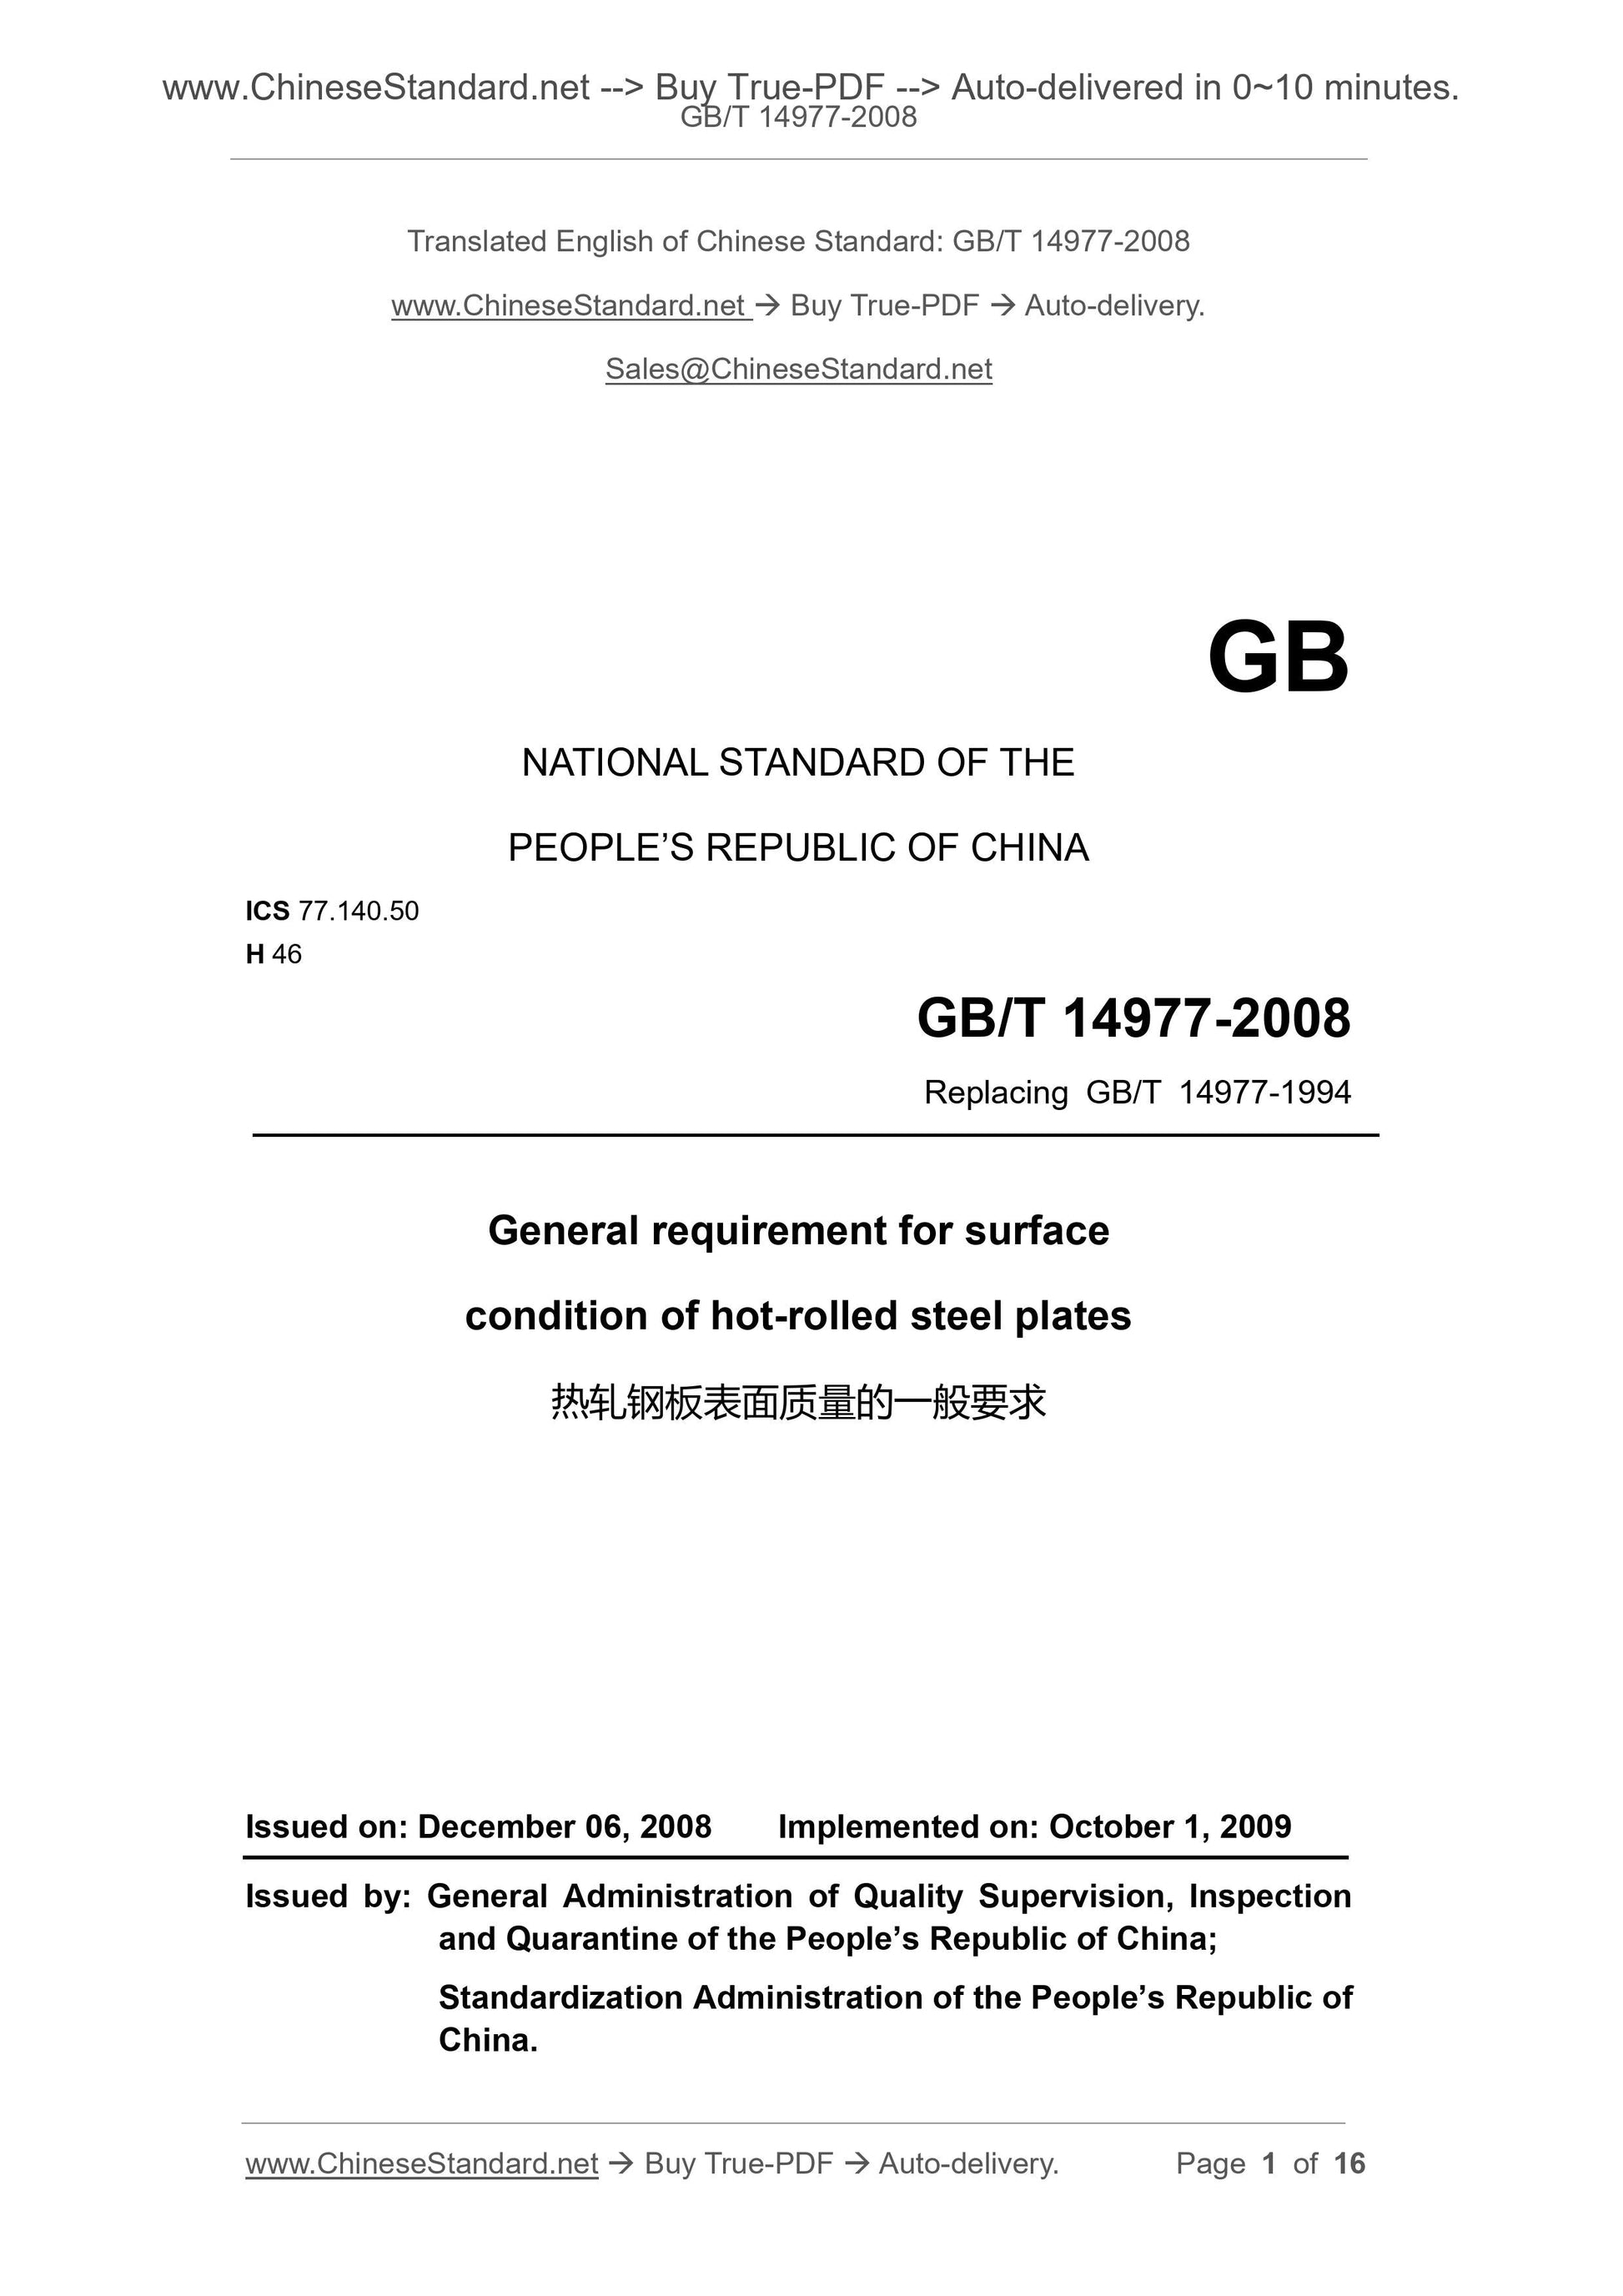 GB/T 14977-2008 Page 1